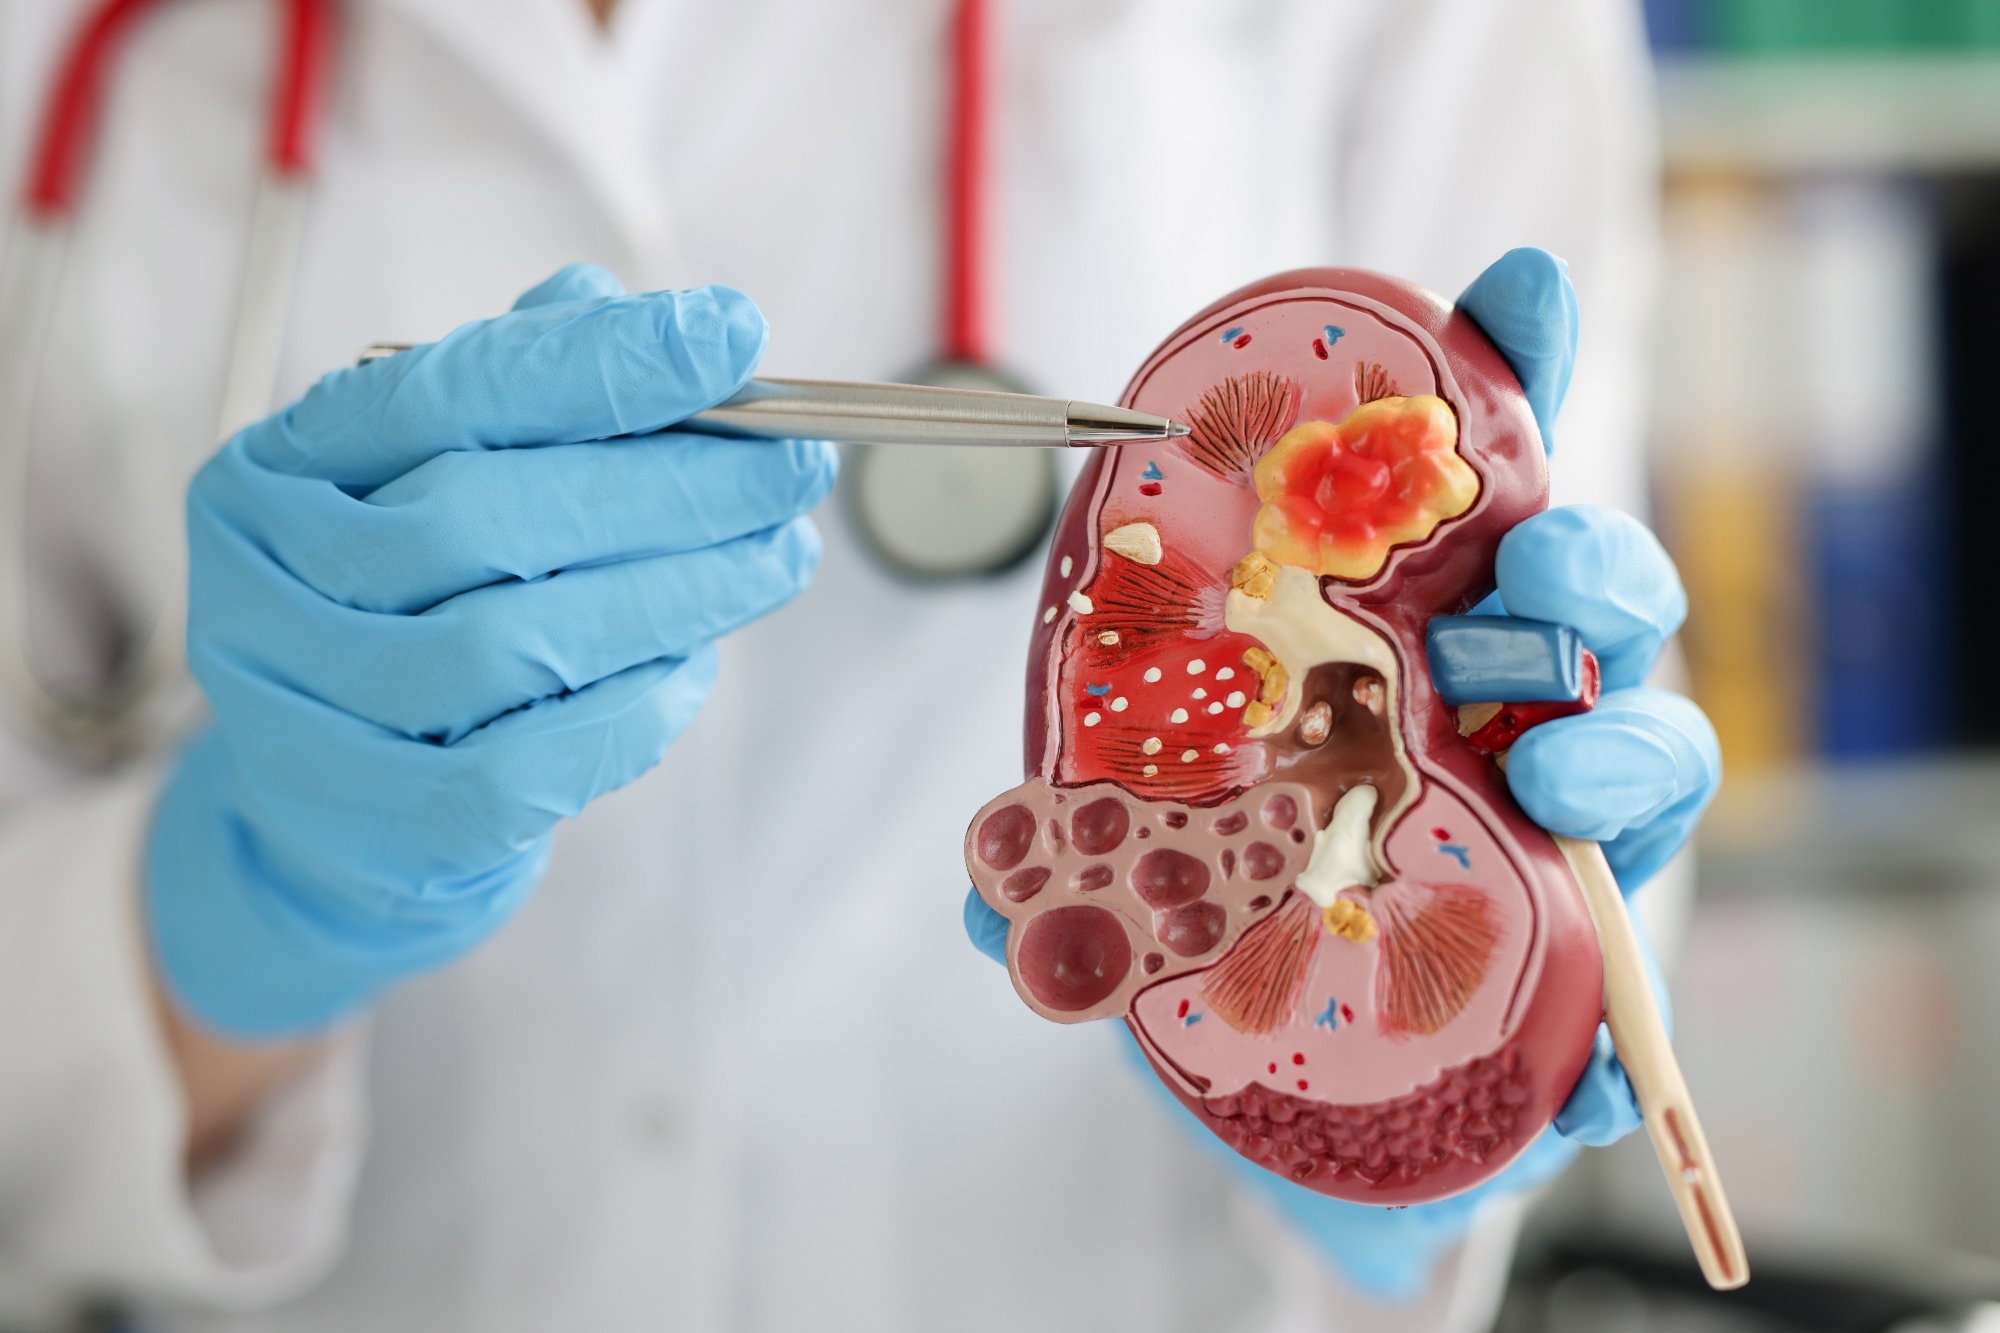 Study: Epigenetic clocks indicate that kidney transplantation and not dialysis mitigate the effects of renal aging. Image Credit: H_Ko / Shutterstock.com